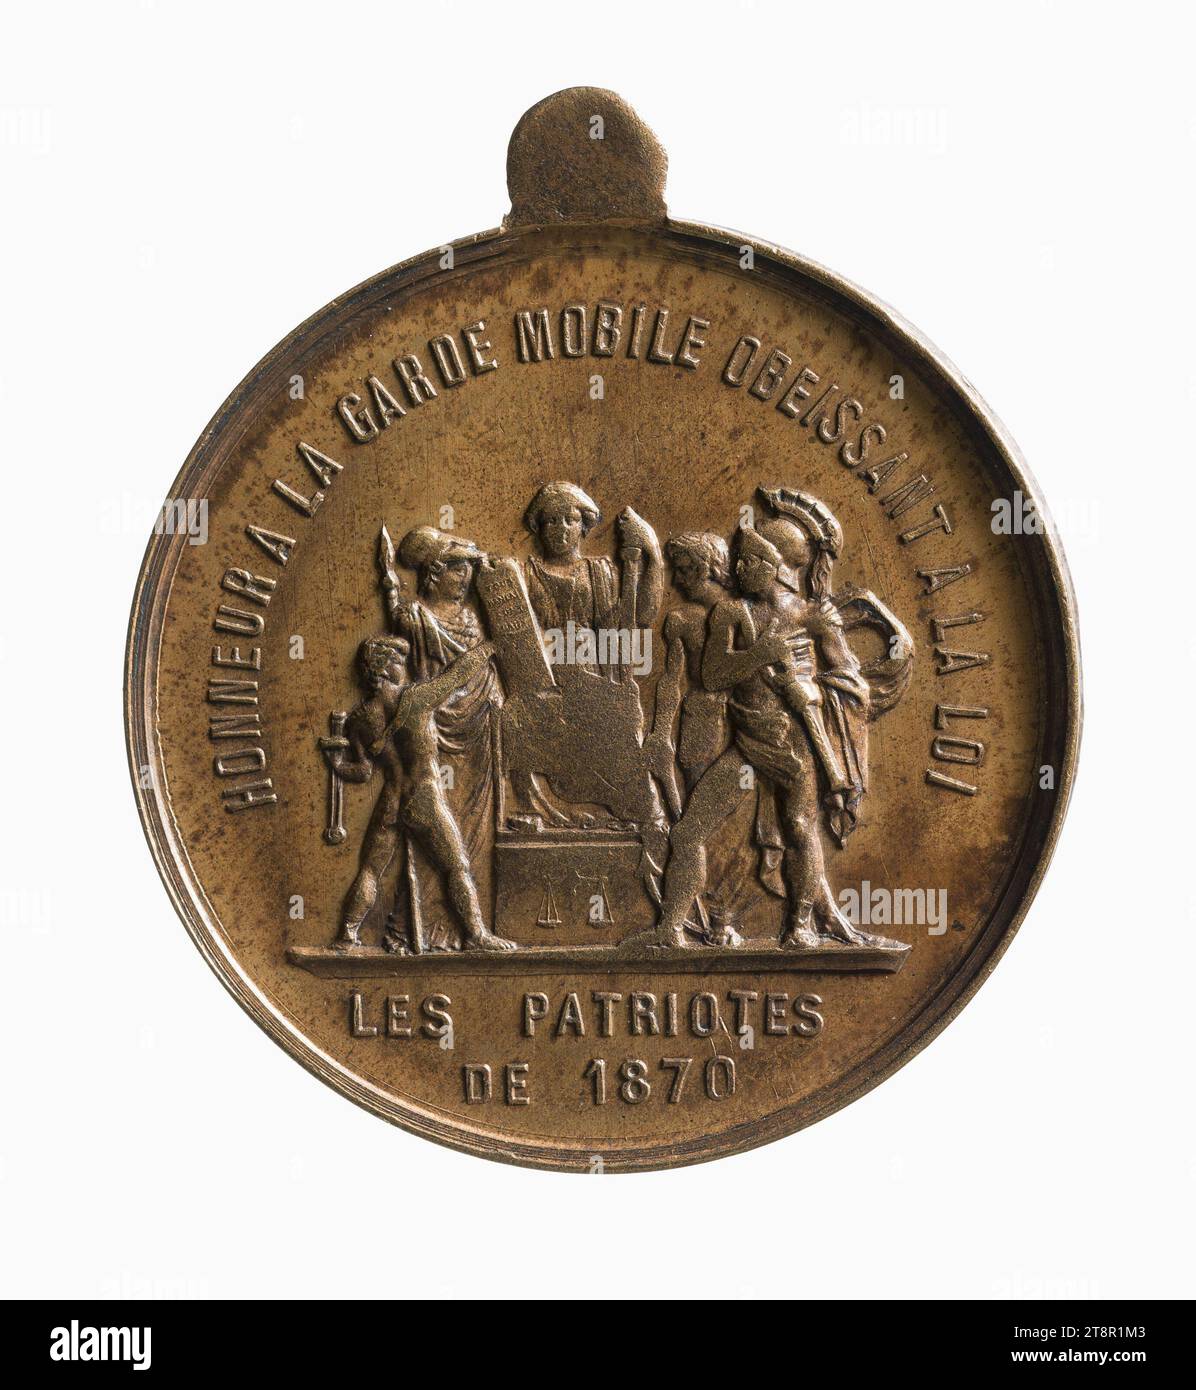 Adolphe Thiers: Honor to the mobile guard, 1870, Array, Numismatic, Medal, Bronze, Dimensions - Work: Diameter: 2.8 cm, Weight (type dimension): 8.14 g Stock Photo